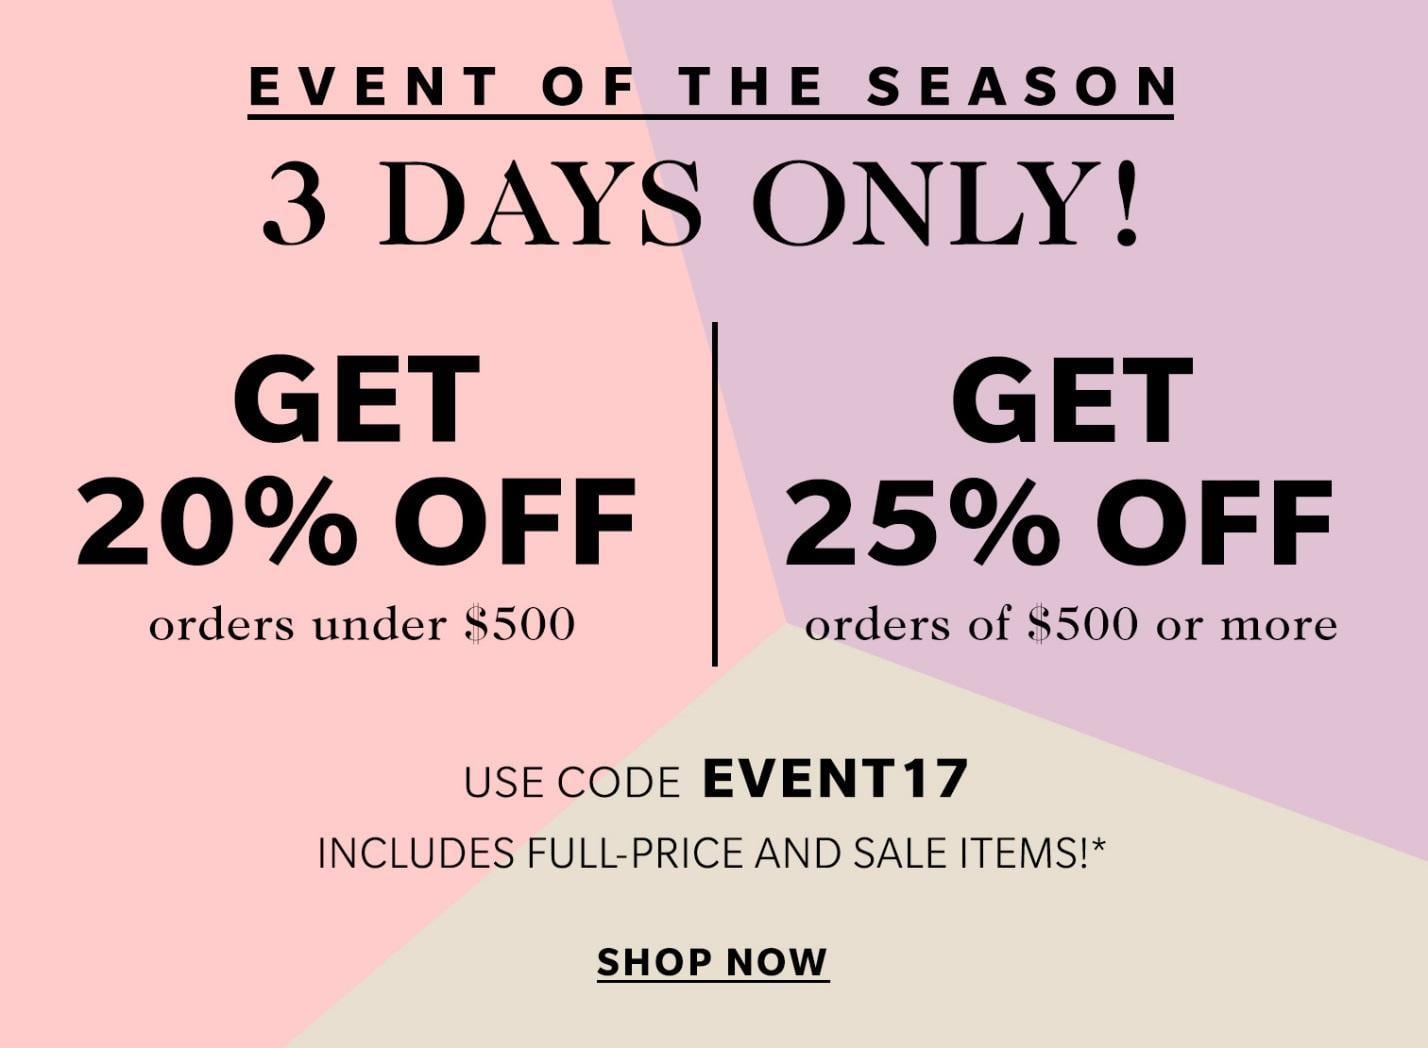 Spring 2017 Shopbop Sale. The best way to get high end, quality clothes and shoes at a great price. Seriously! It's amazing.